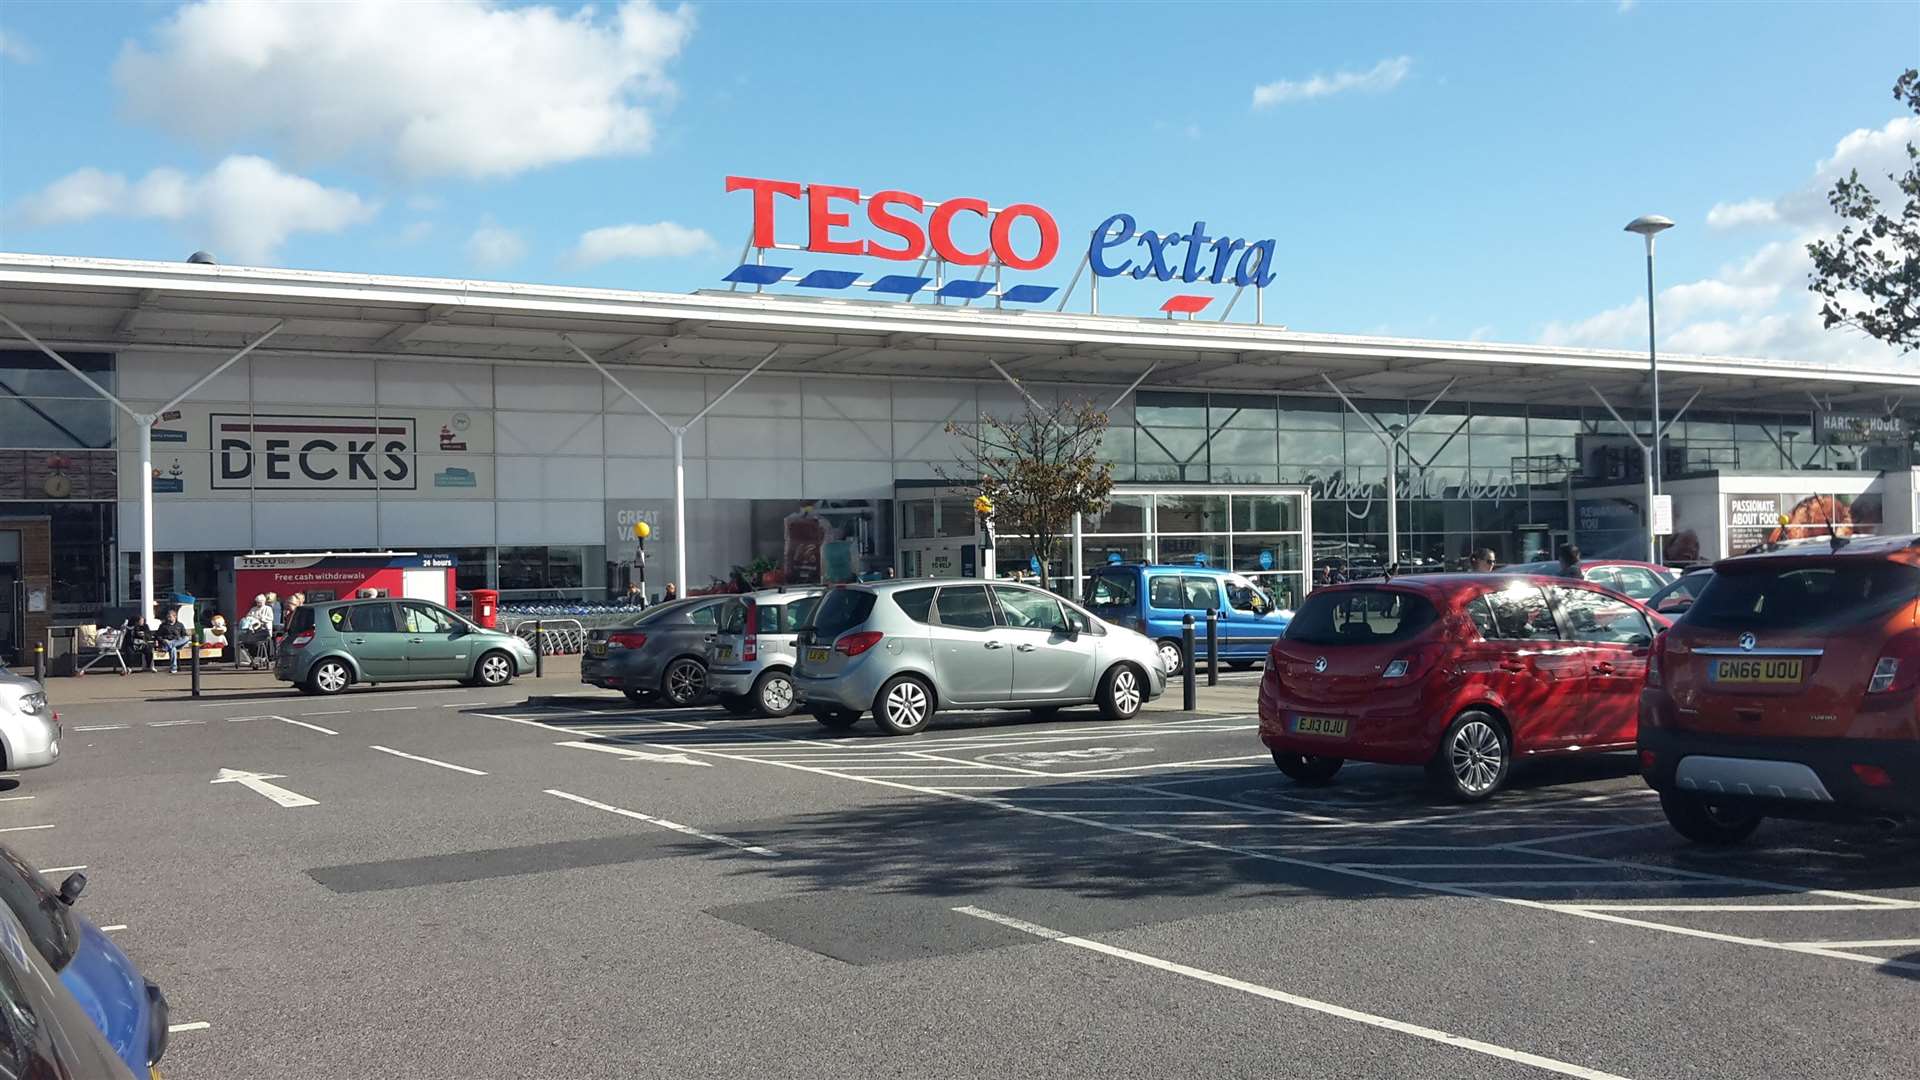 The incident happened in Tesco Extra in Broadstairs